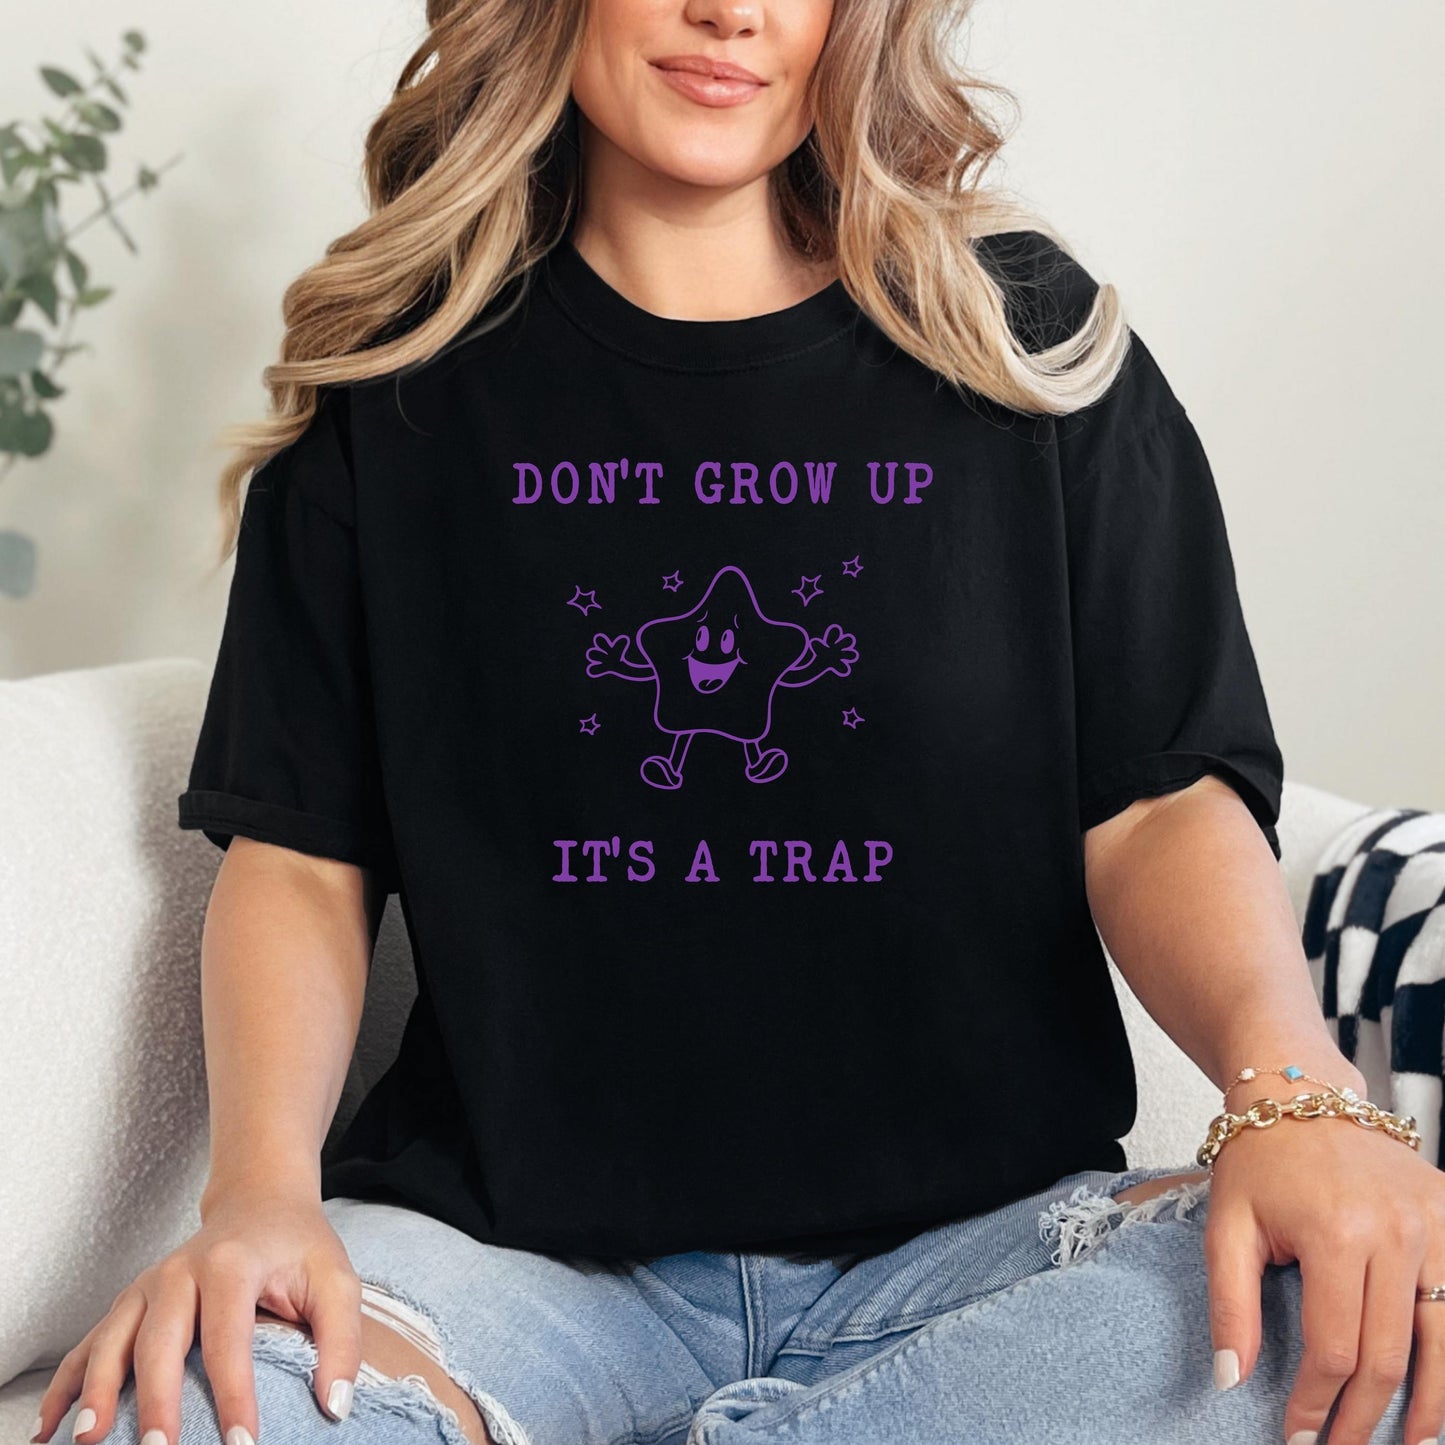 Don't Grow Up It's A Trap T-Shirt